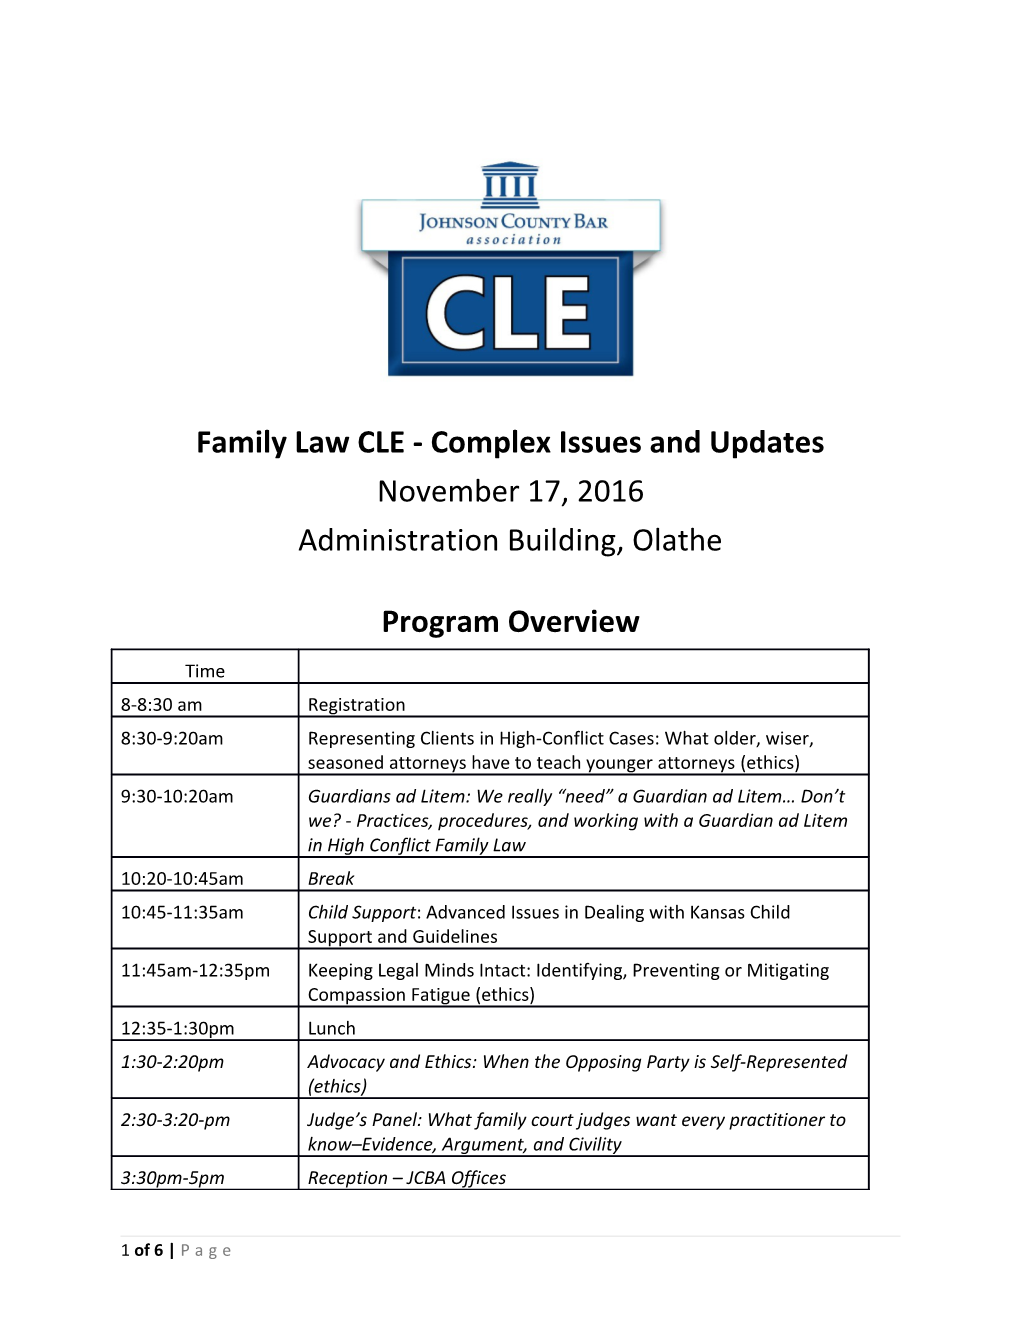 Family Law CLE - Complex Issues and Updates